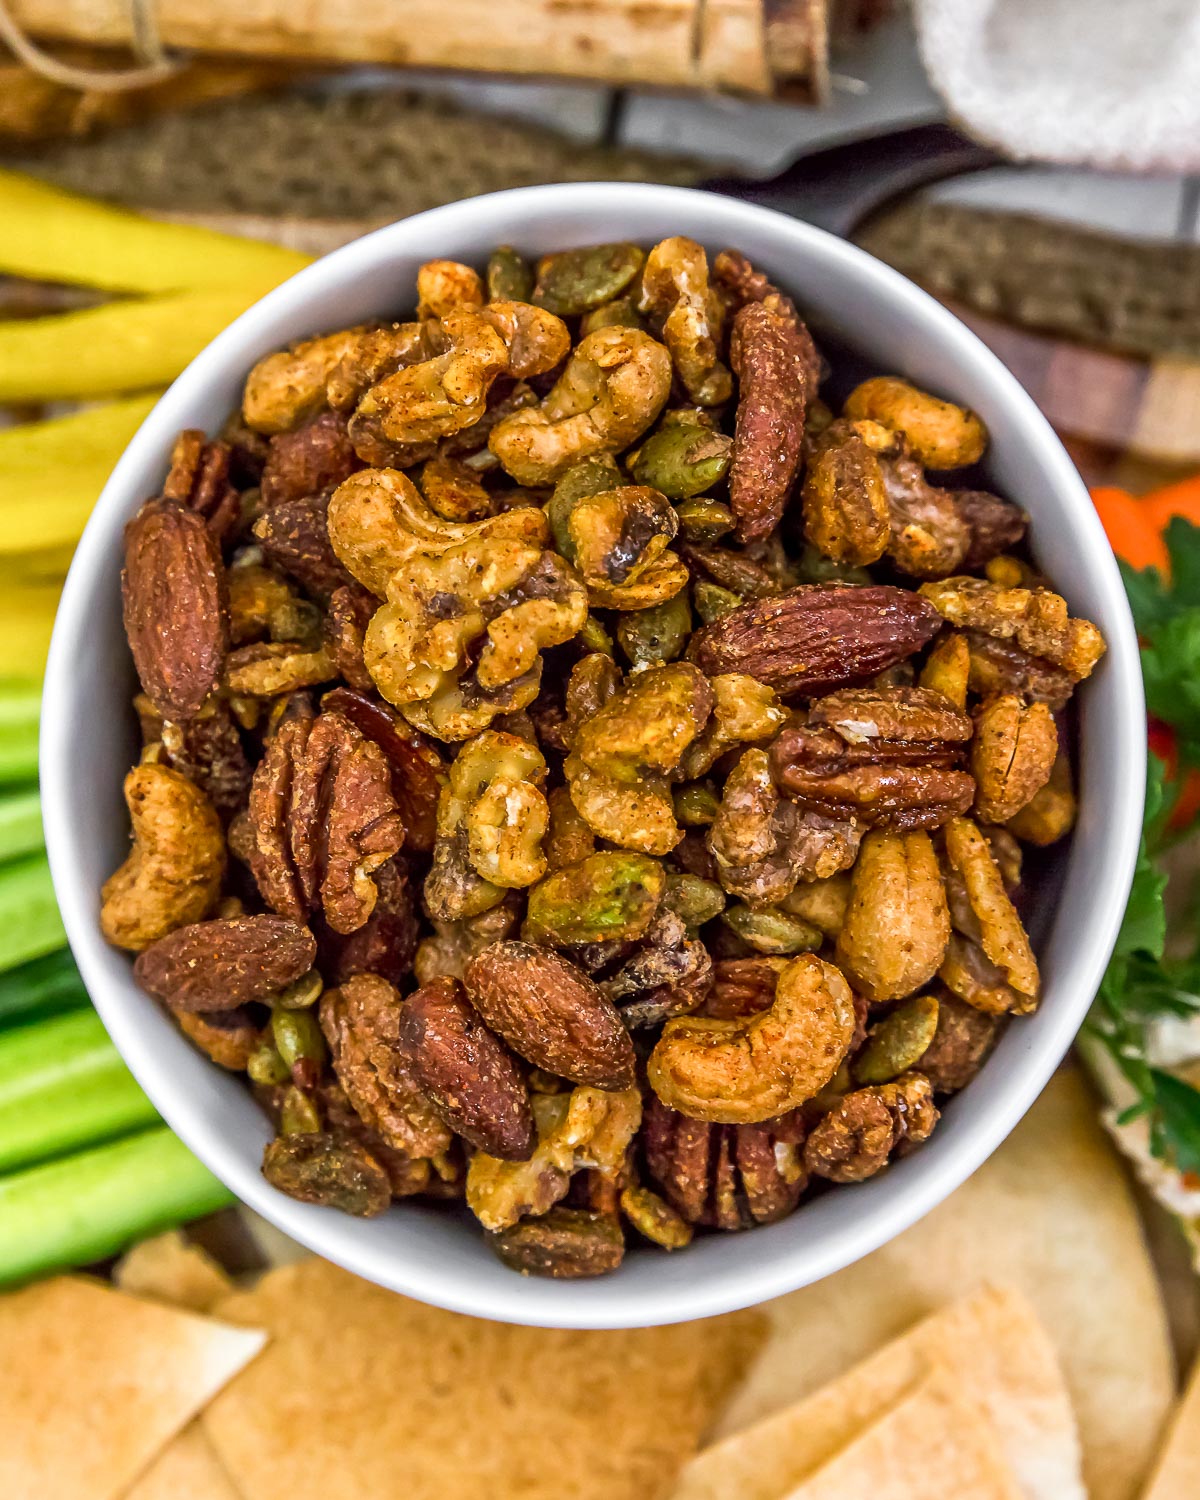 Bowl of Oil Free Spiced Nuts